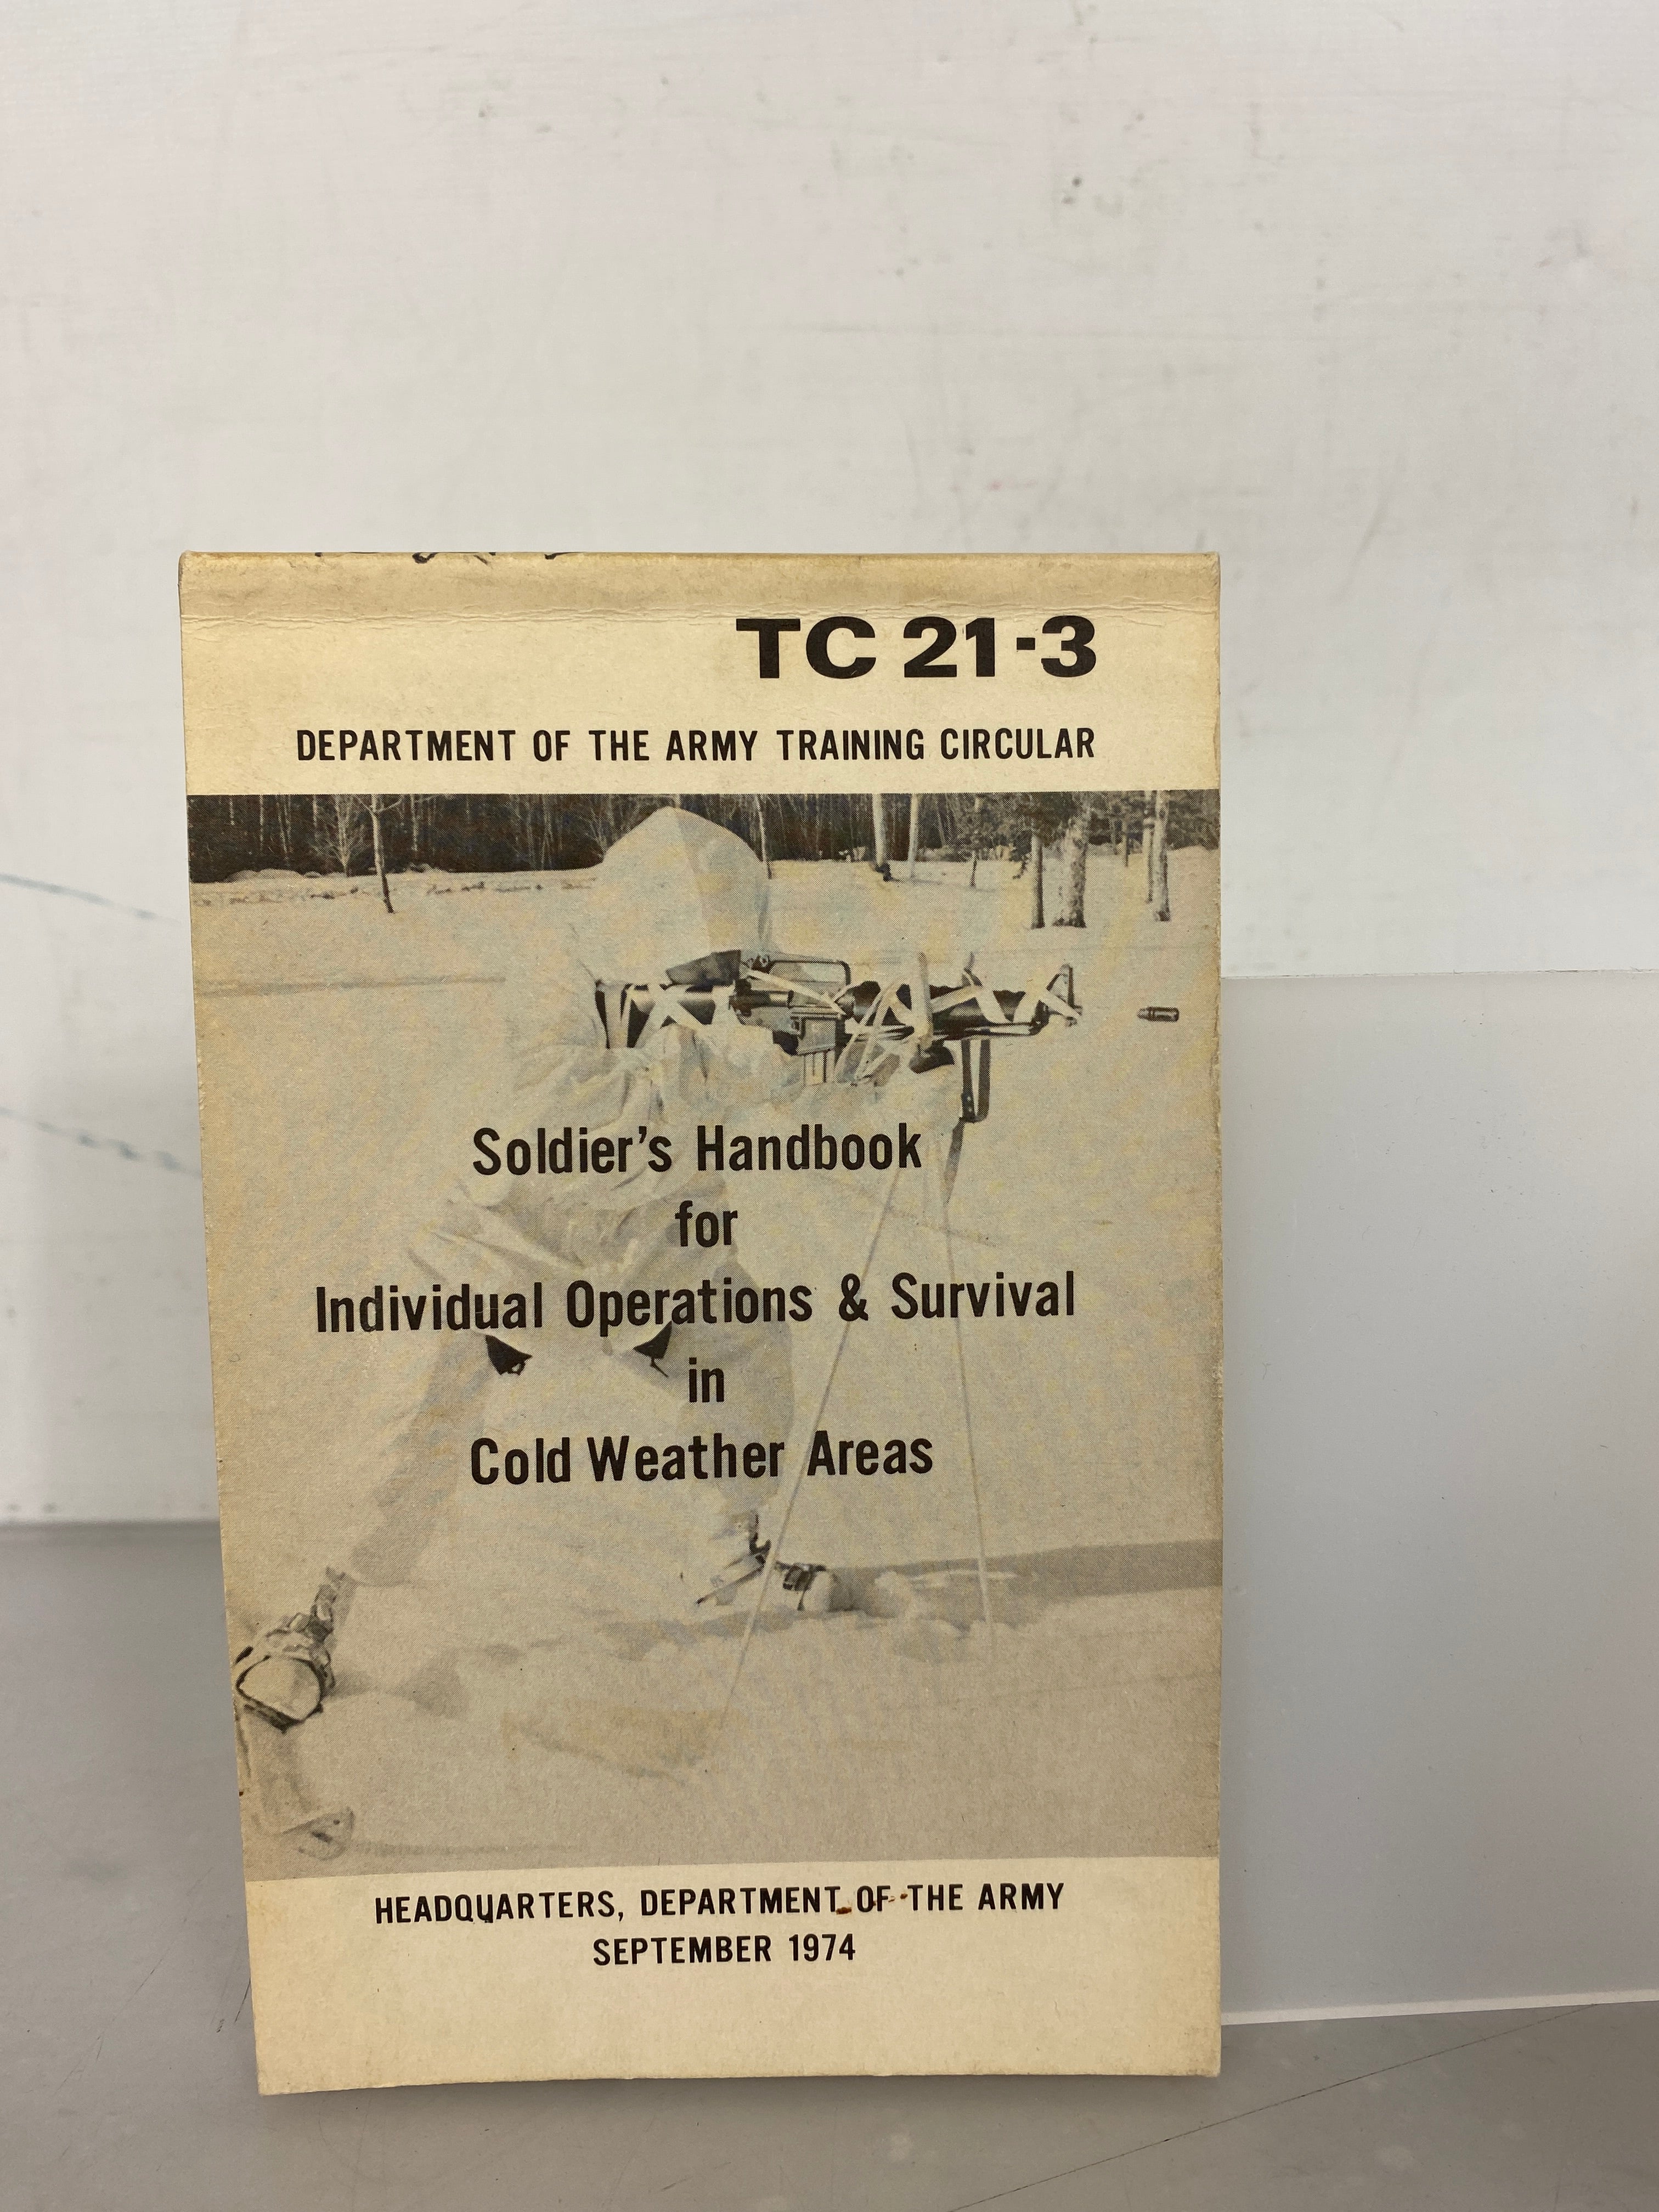 U.S. Army Soldier's Handbook for Individual Operations & Survival in Cold Weather Areas TC 21-3 1974 SC